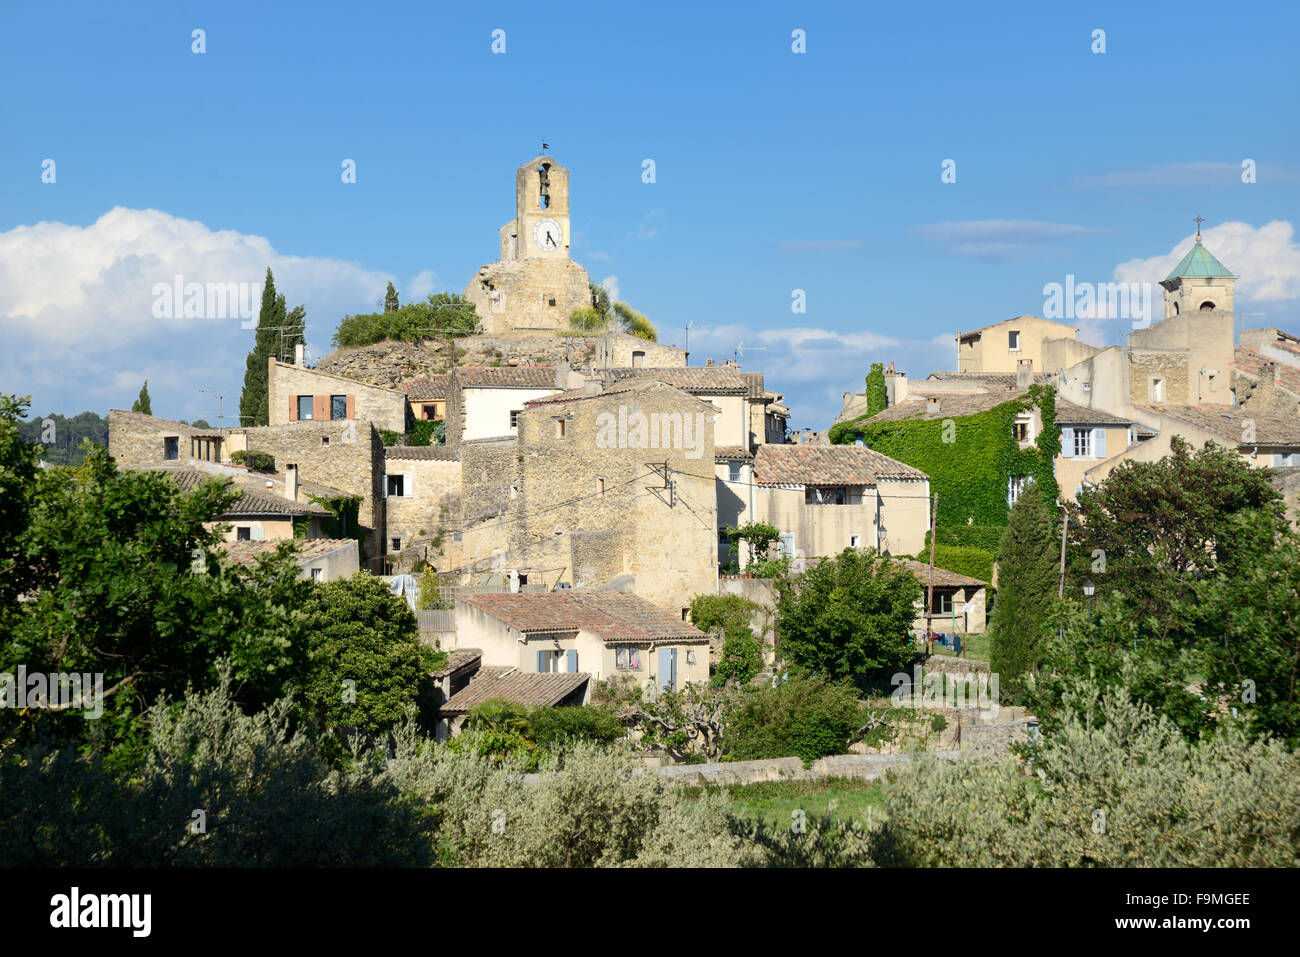 The Provençal Village of Lourmarin in the Luberon Regional Park Vaucluse Provence France Stock Photo